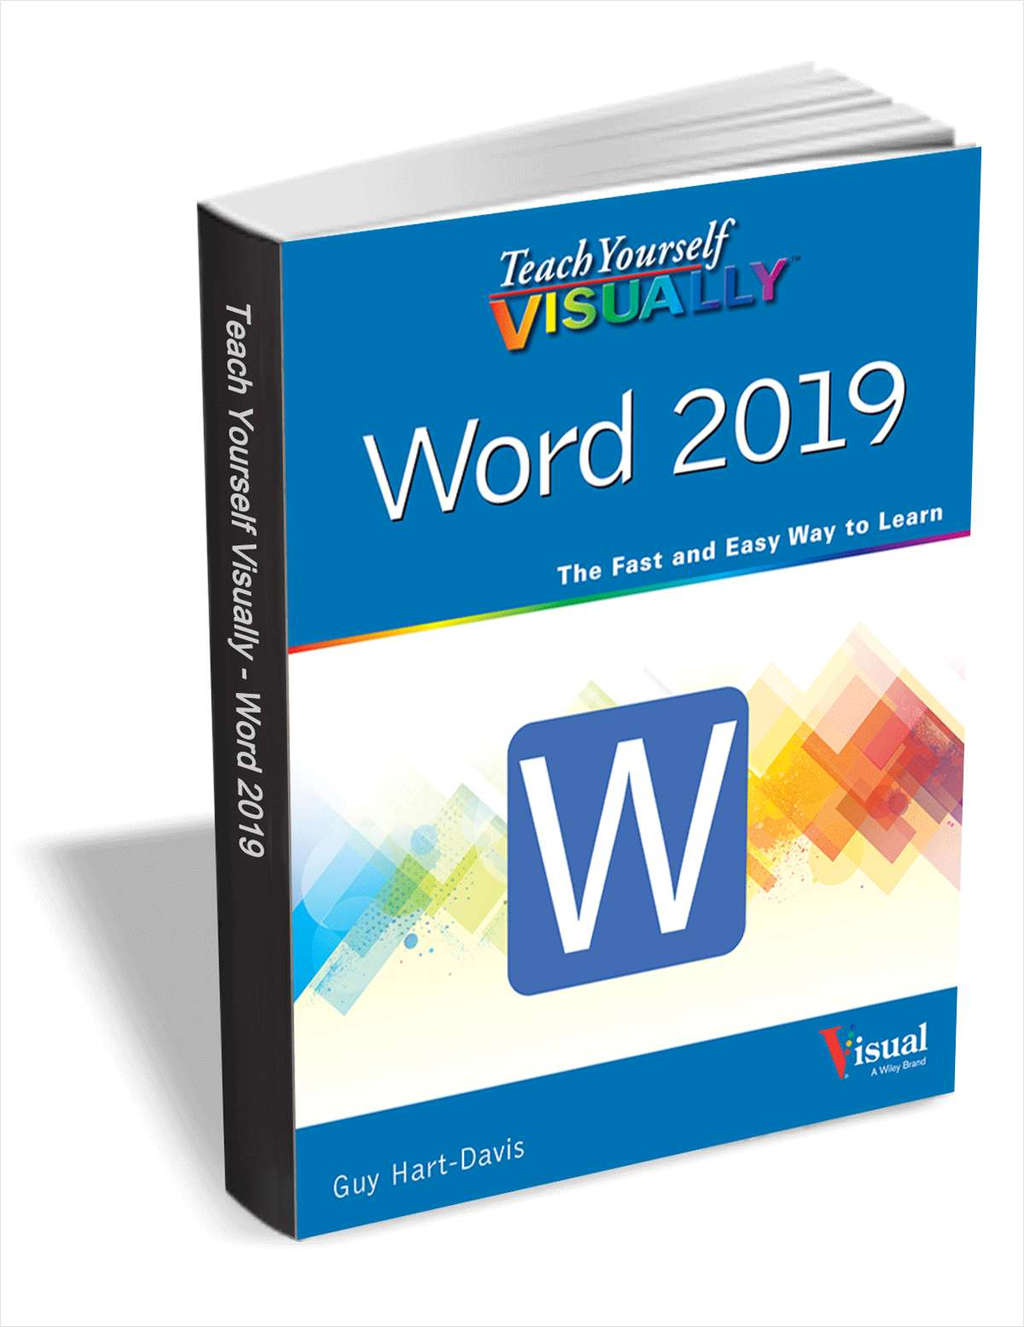 Teach Yourself VISUALLY - Word 2019 ($18.00 Value) FREE for a Limited Time Screenshot